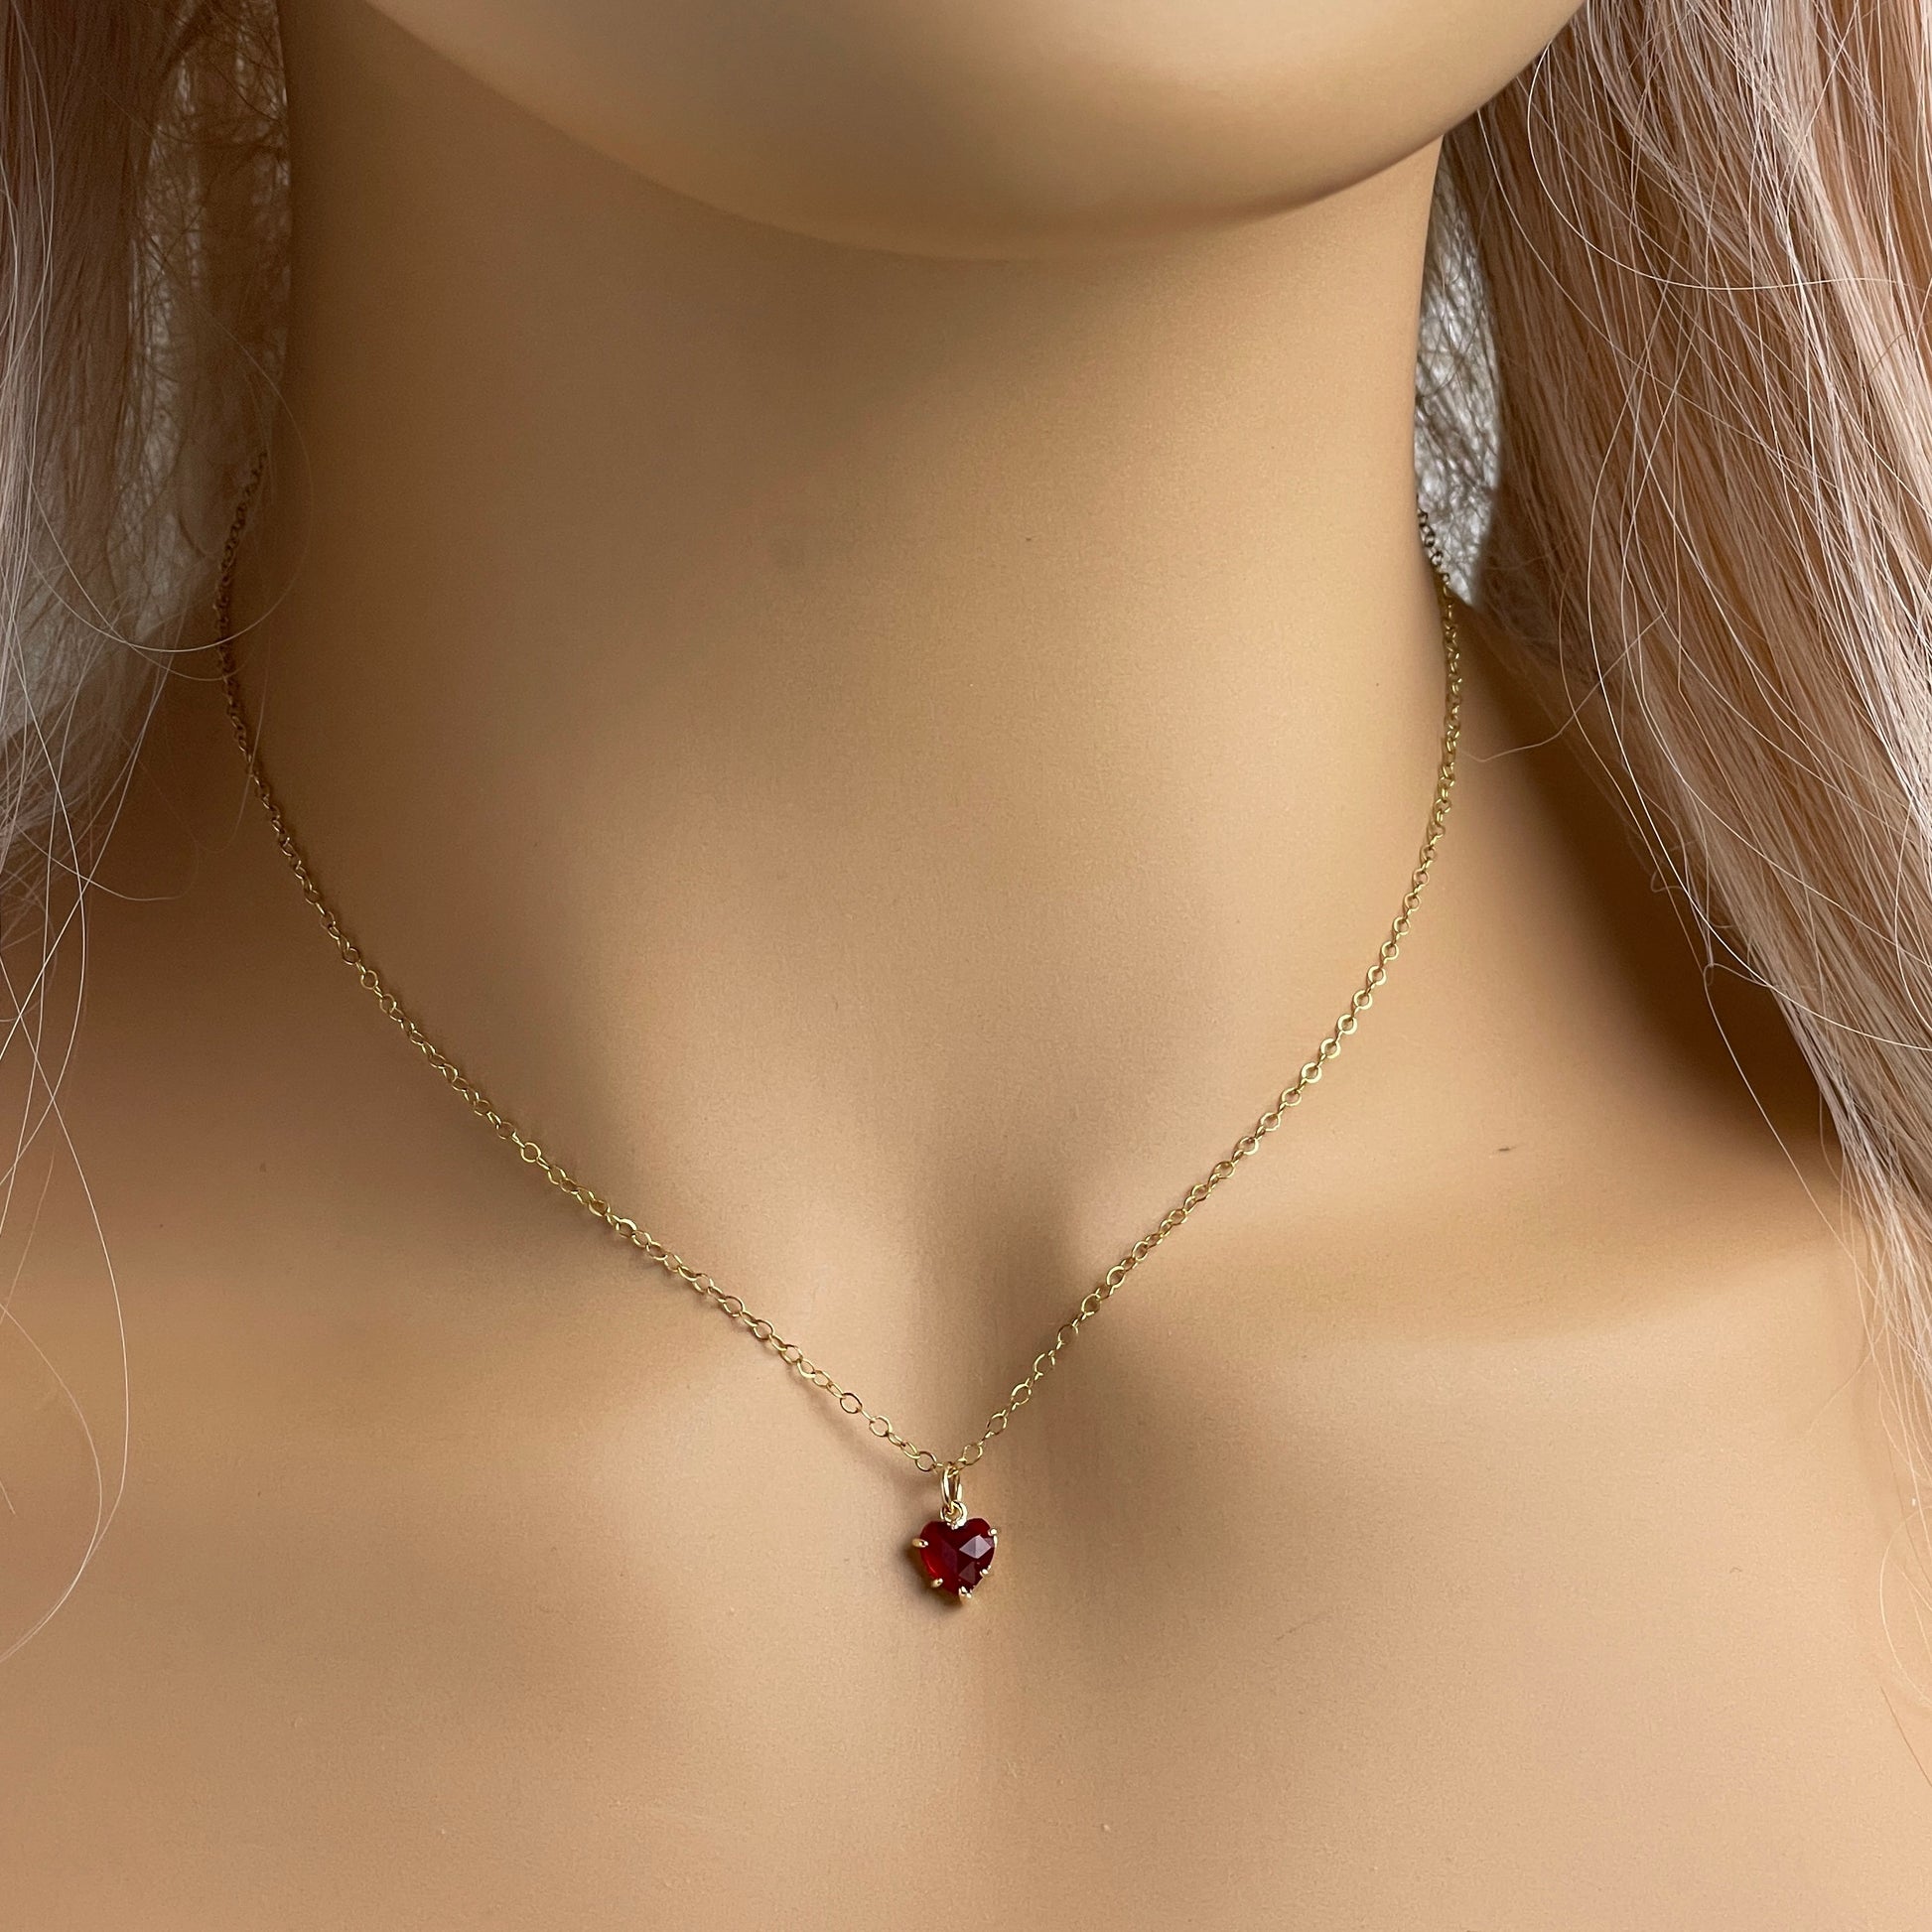 Tiny Heart Necklace Gold, Red Heart Charm Cubic Zirconia Stone, Gift For Her, M6-25